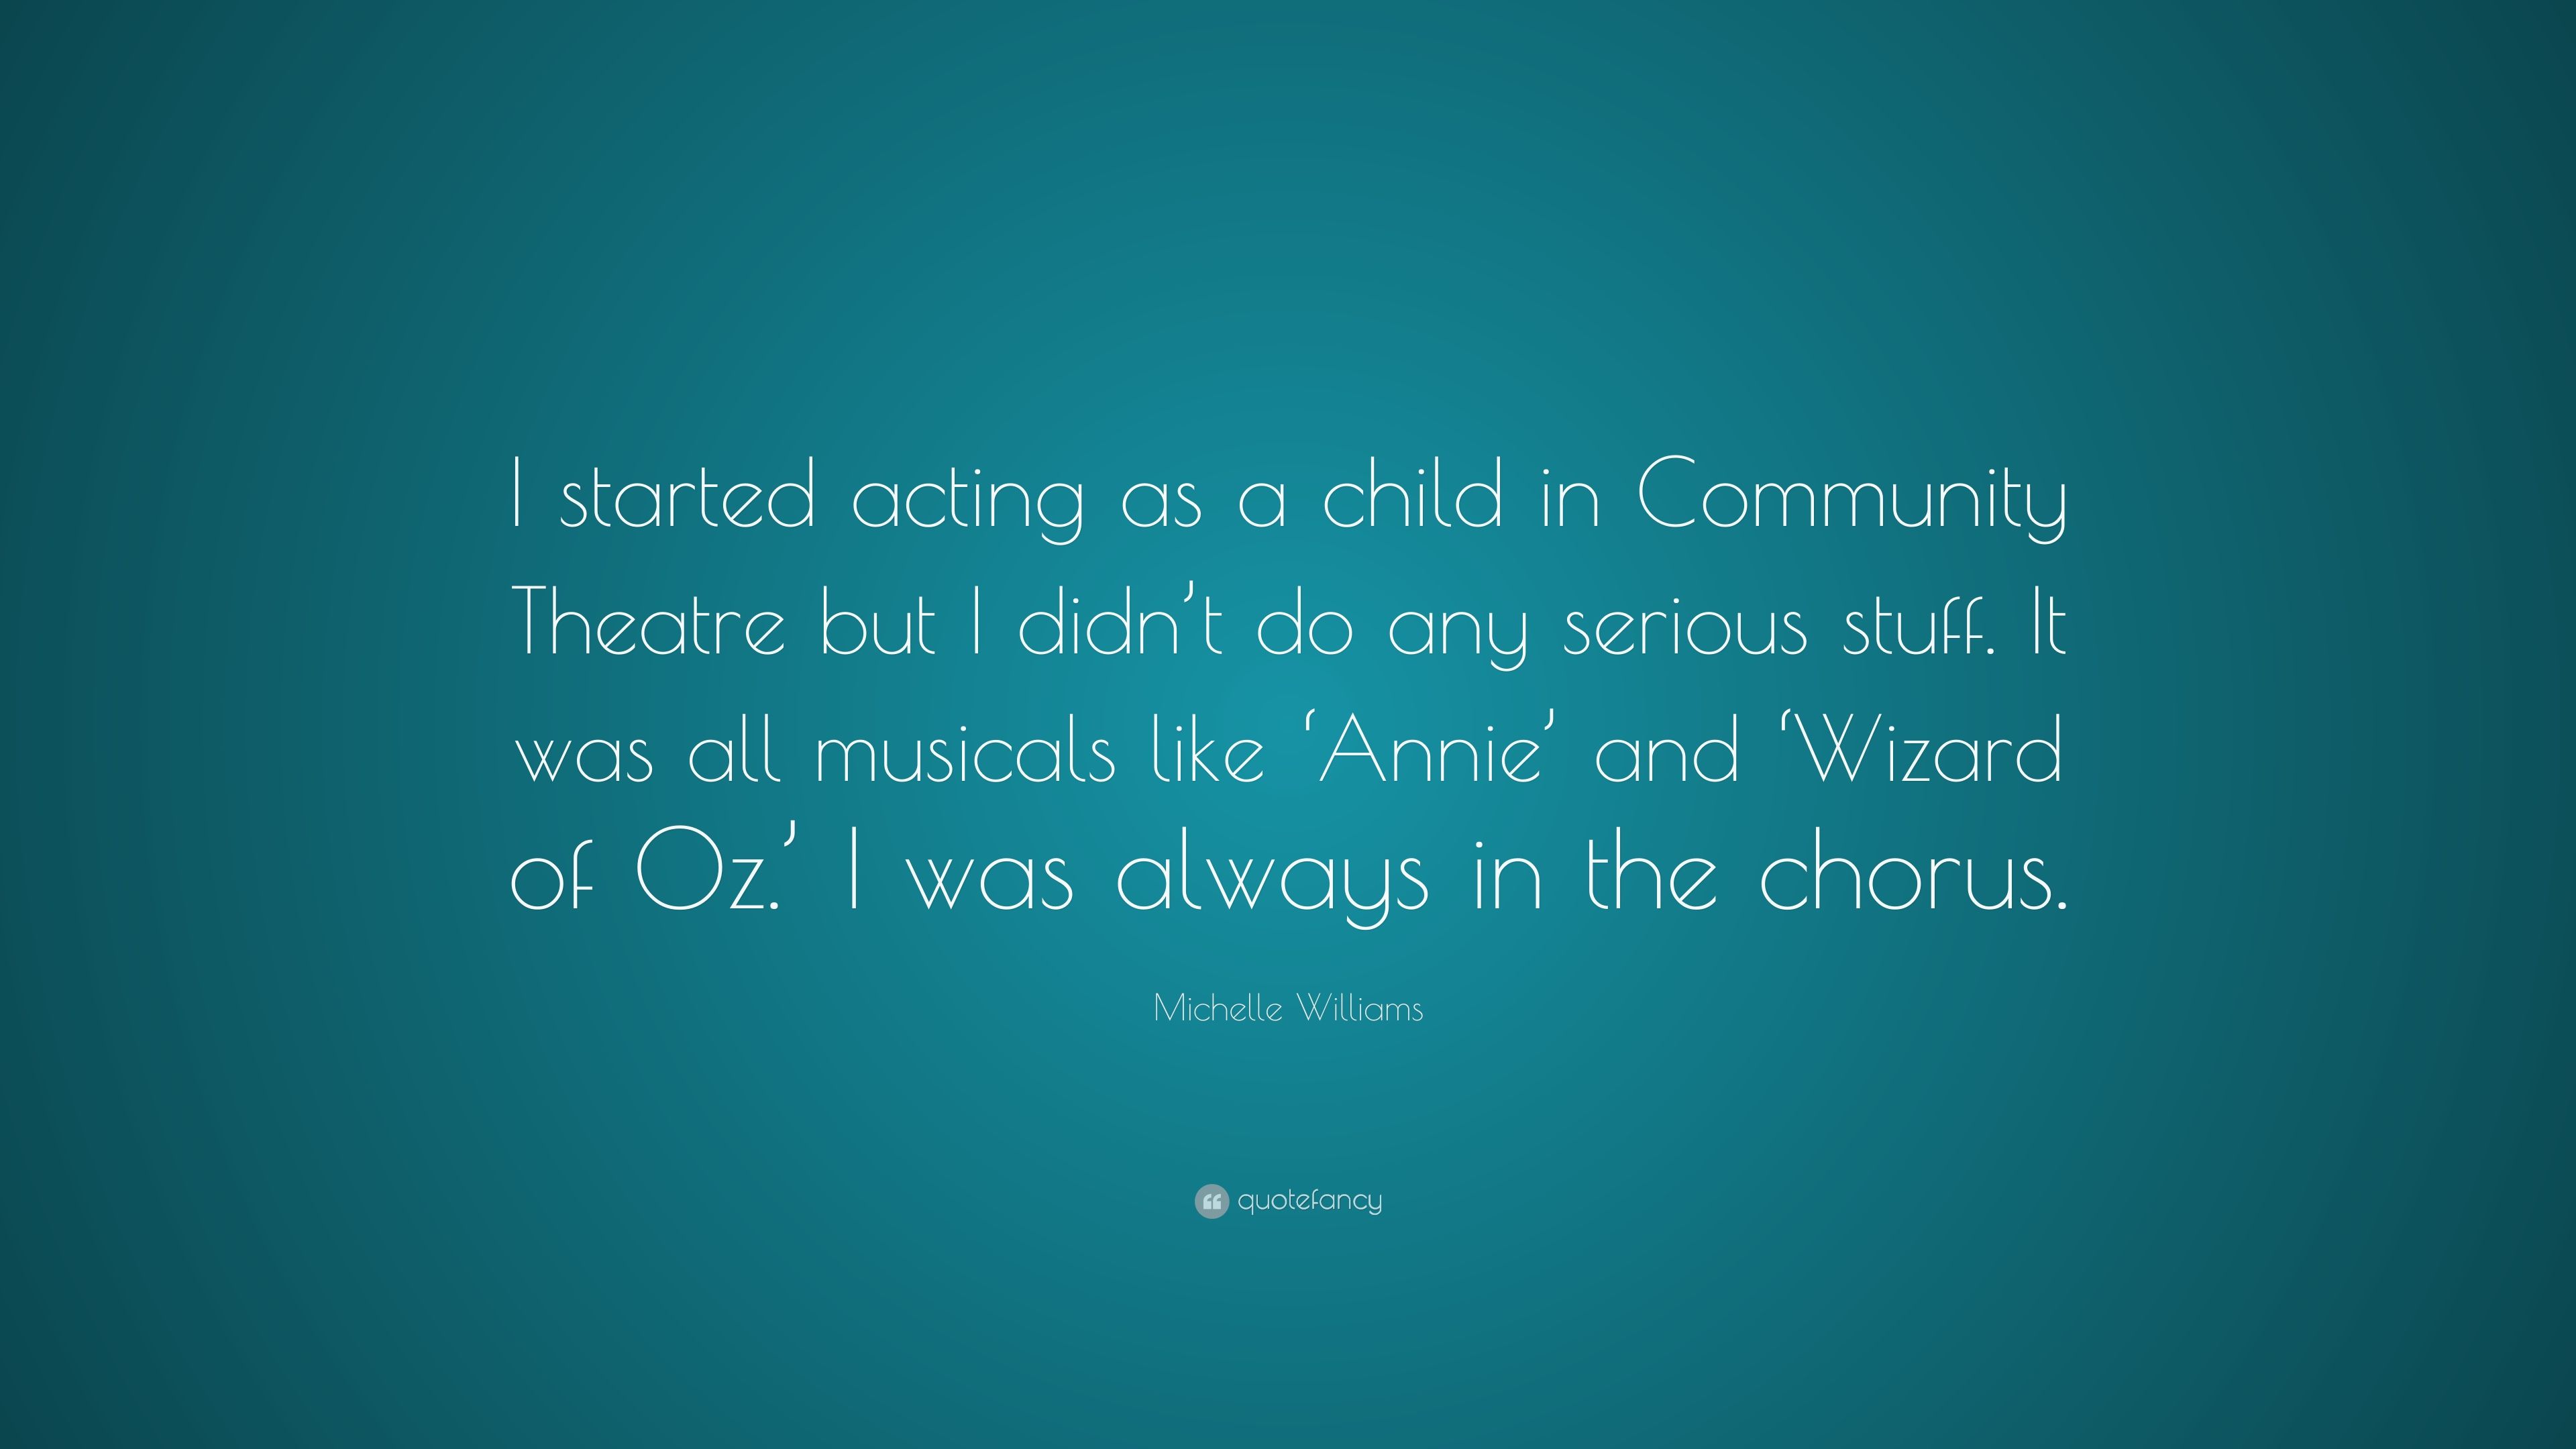 Michelle Williams Quote: “I started acting as a child in Community